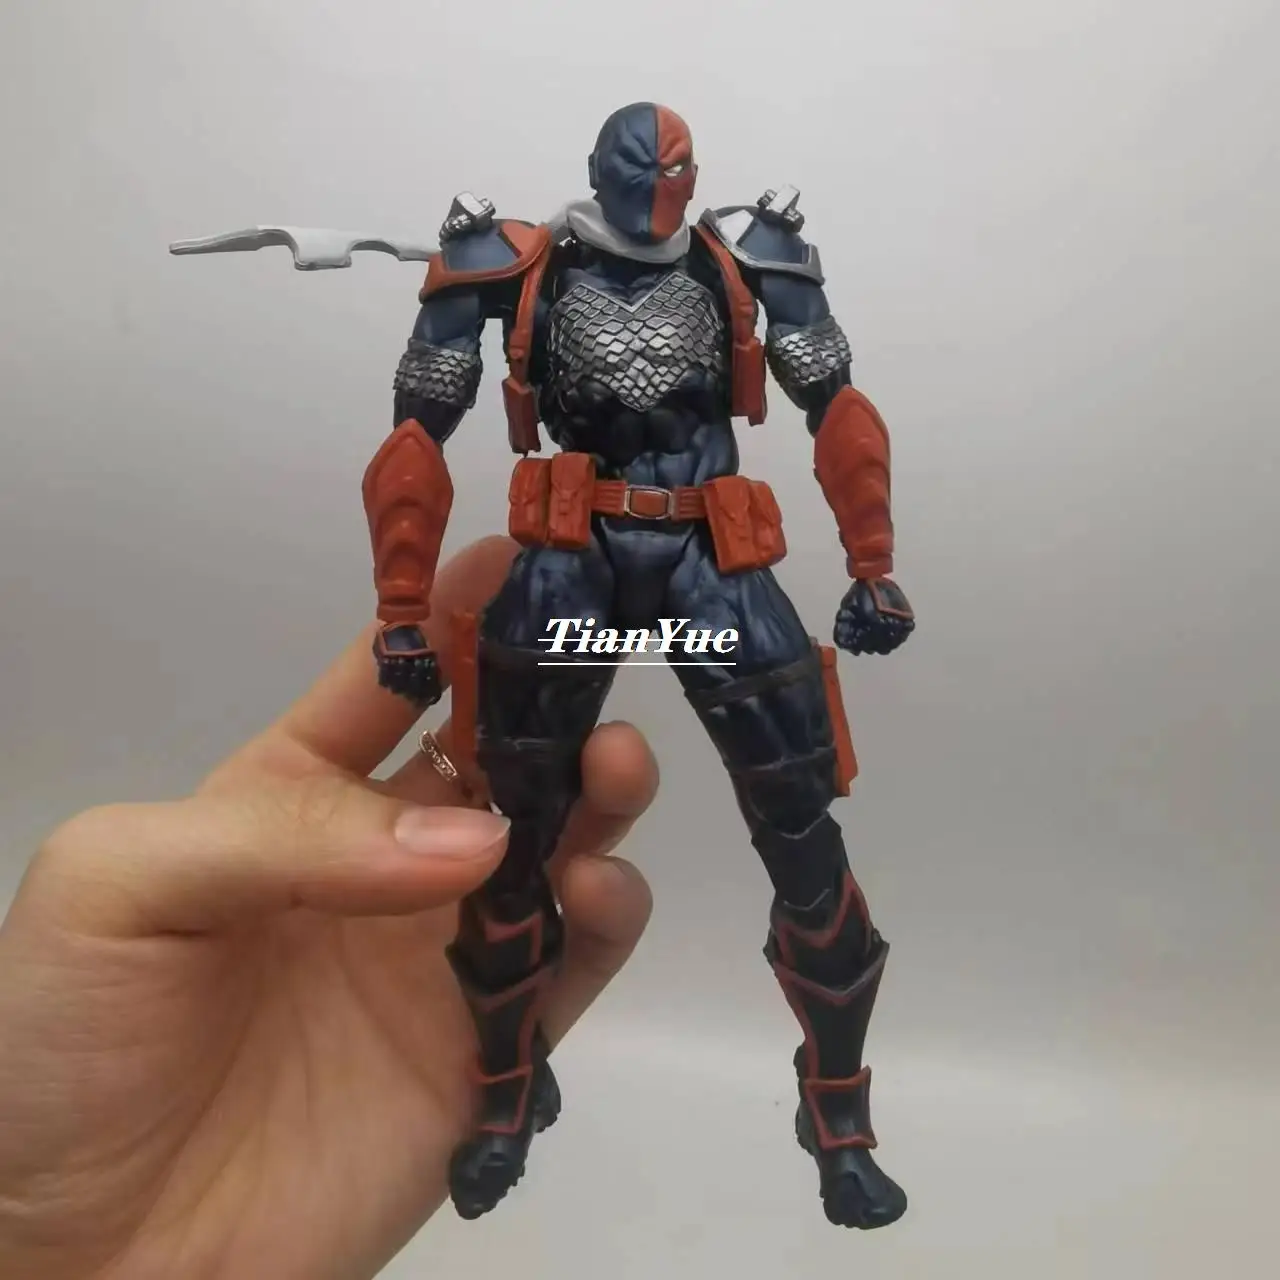 Anime Deathstroke Articulated Action Figure Model Decoration children's Xmas gift 17cm